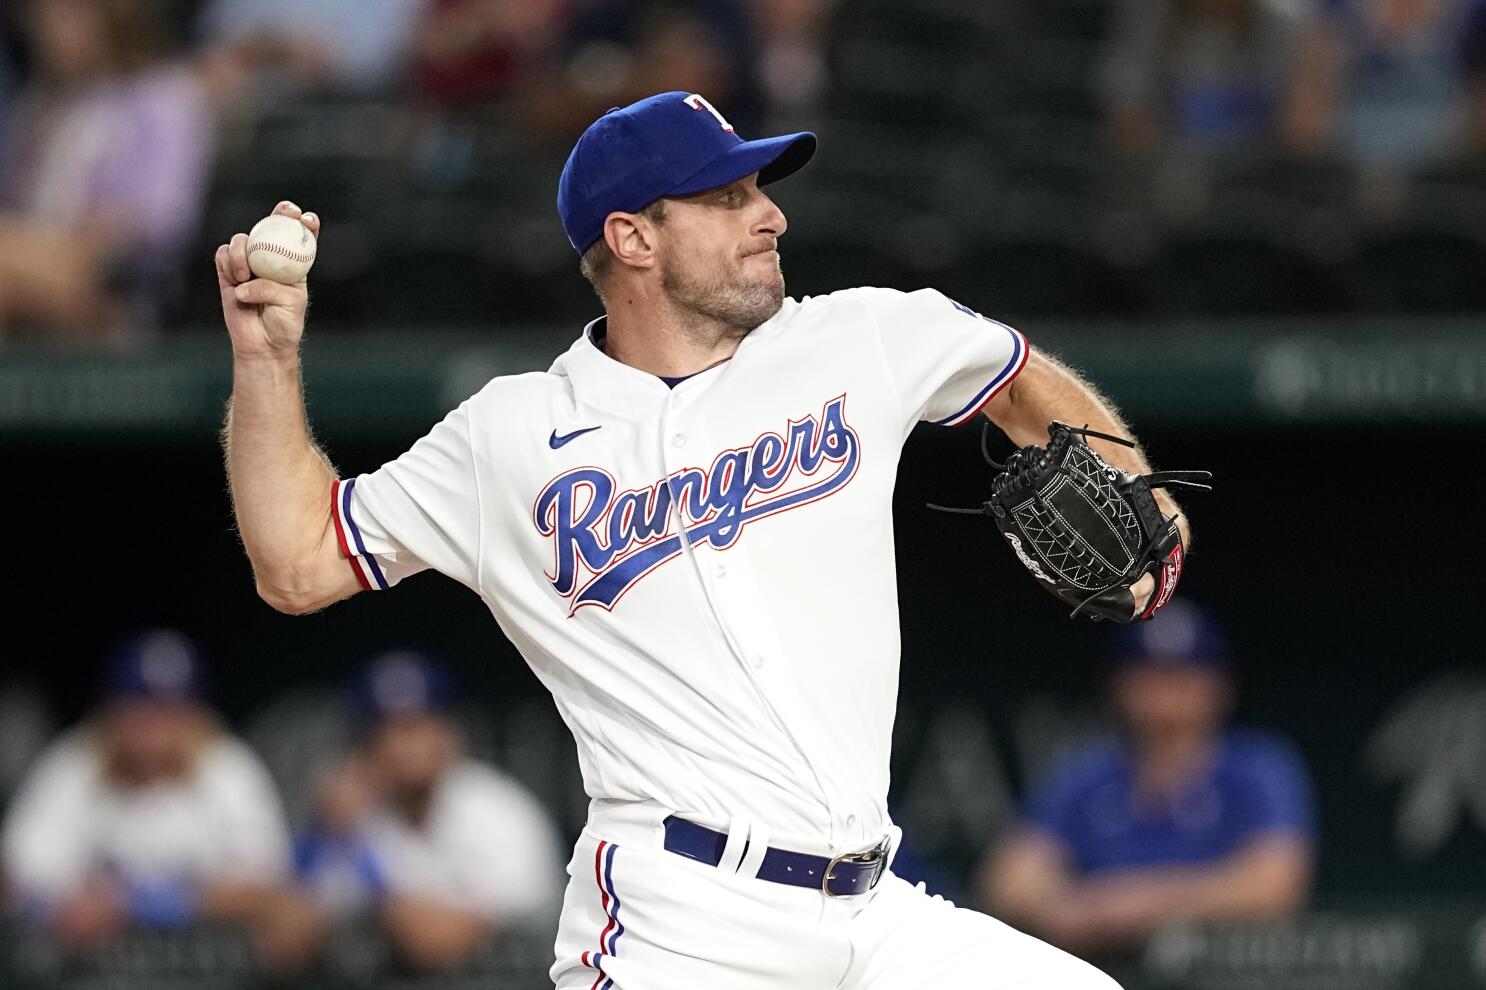 Texas Rangers sustain streak with win over Chicago White Sox